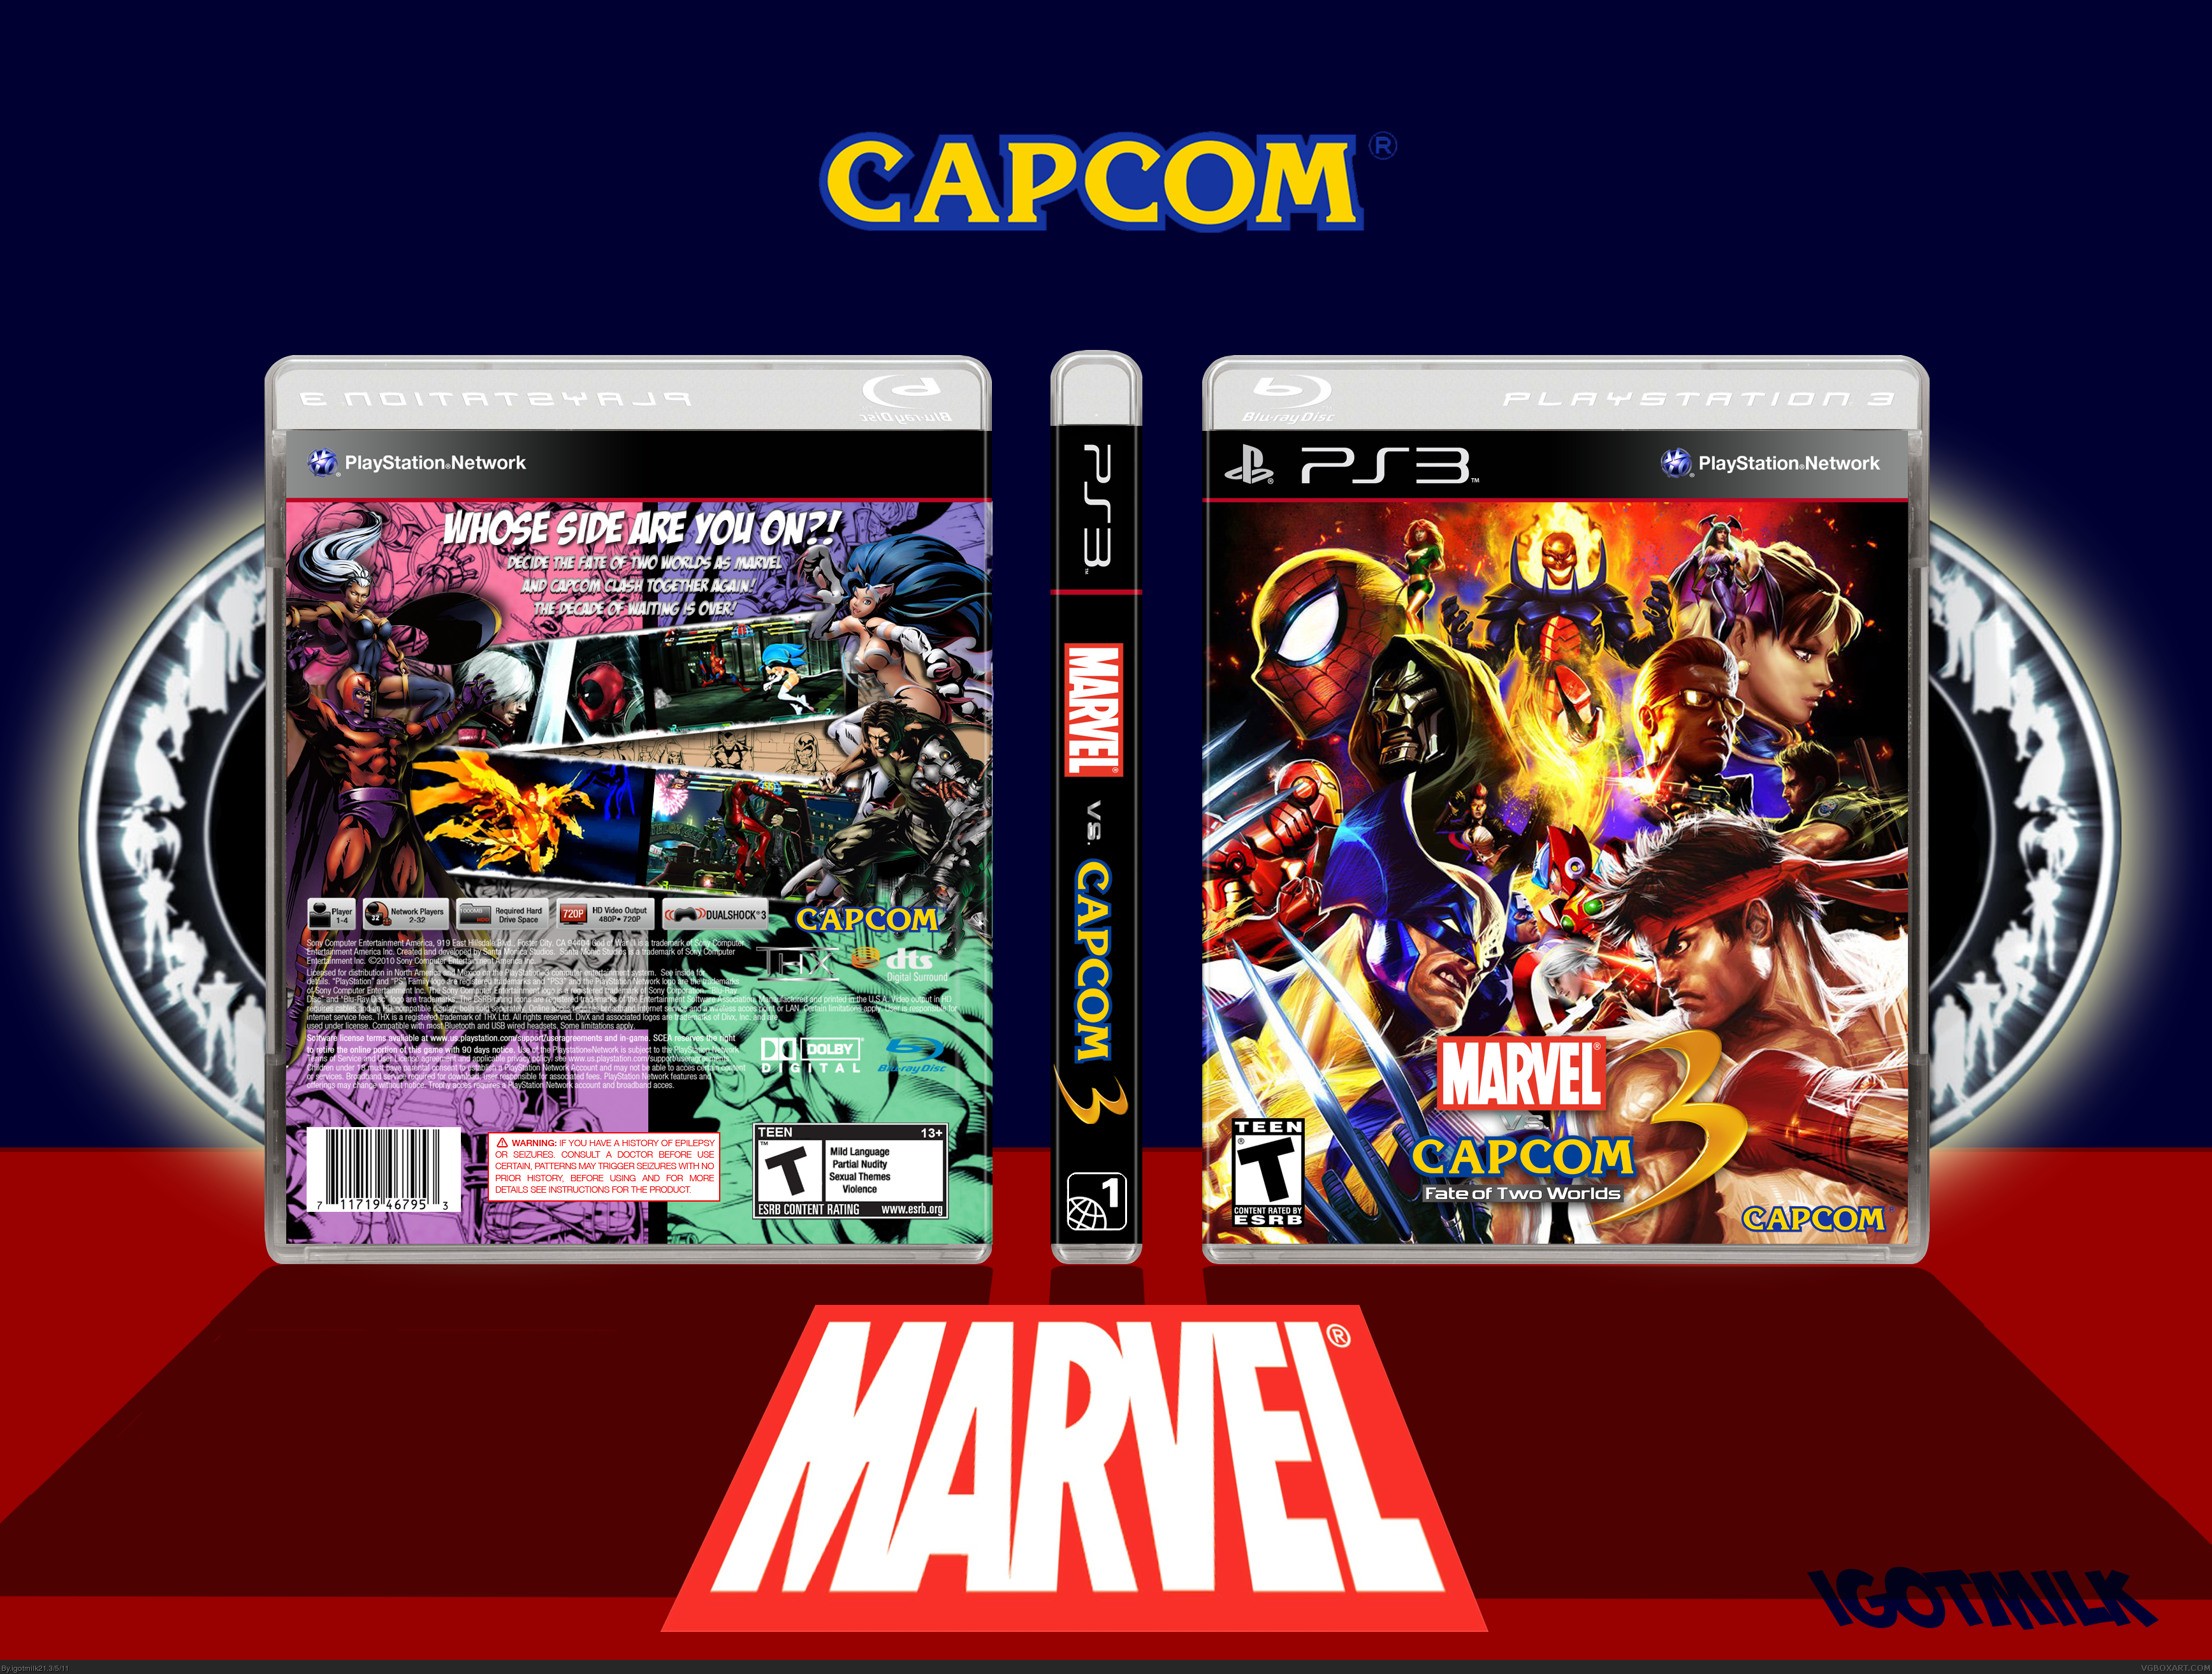 Marvel Vs. Capcom 3: Fate of Two Worlds box cover